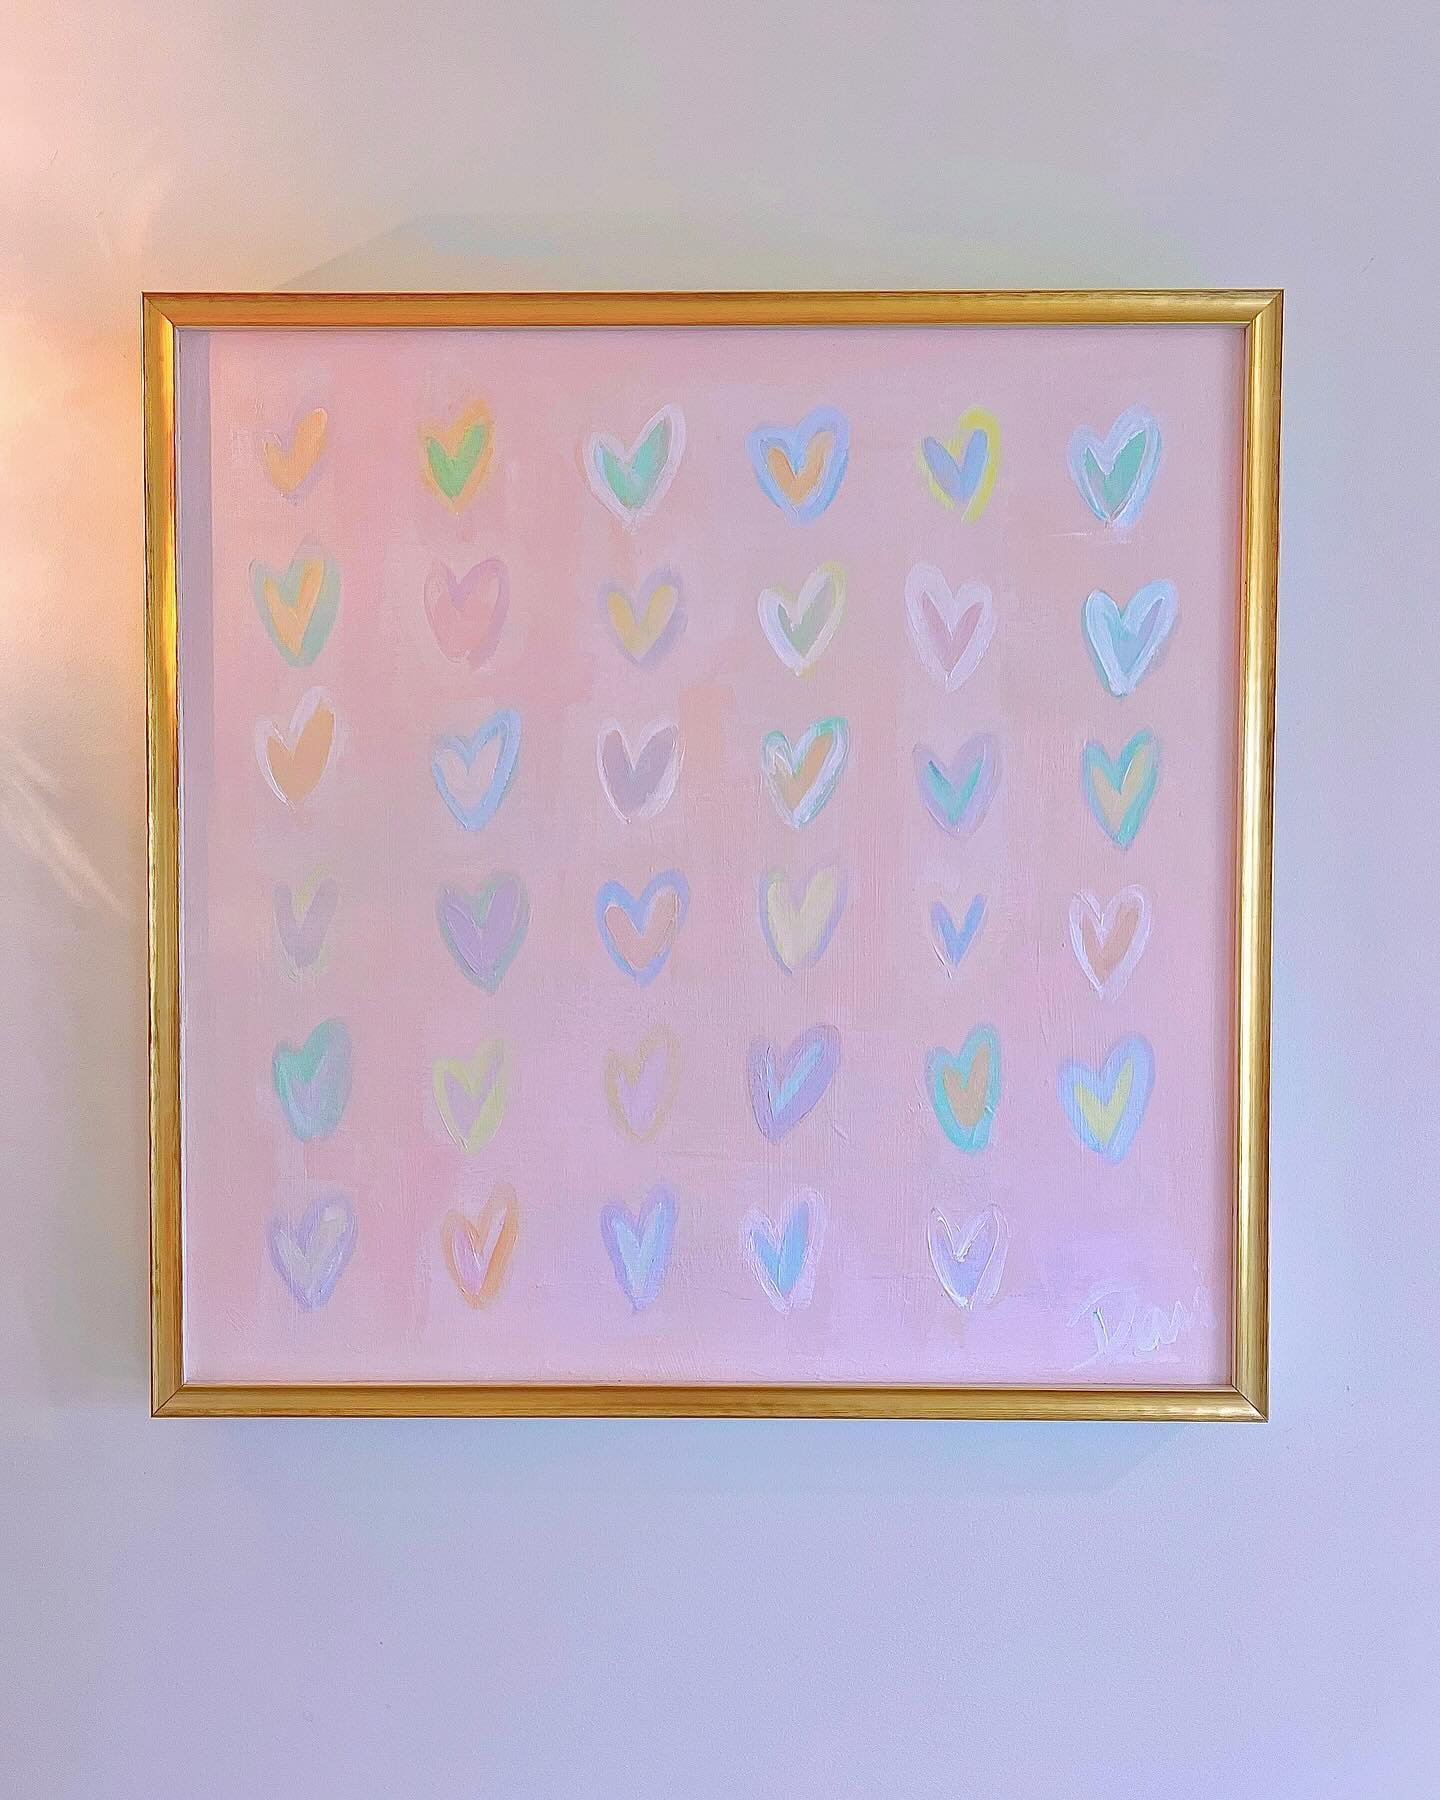 These framed hearts are available to purchase💕 I love these paintings. Each time I look at them, I smile. The frames on the paintings, that I carefully chose with my friend Chris at Vinnin Frames are beautiful.  Below are the paintings in order. Mes